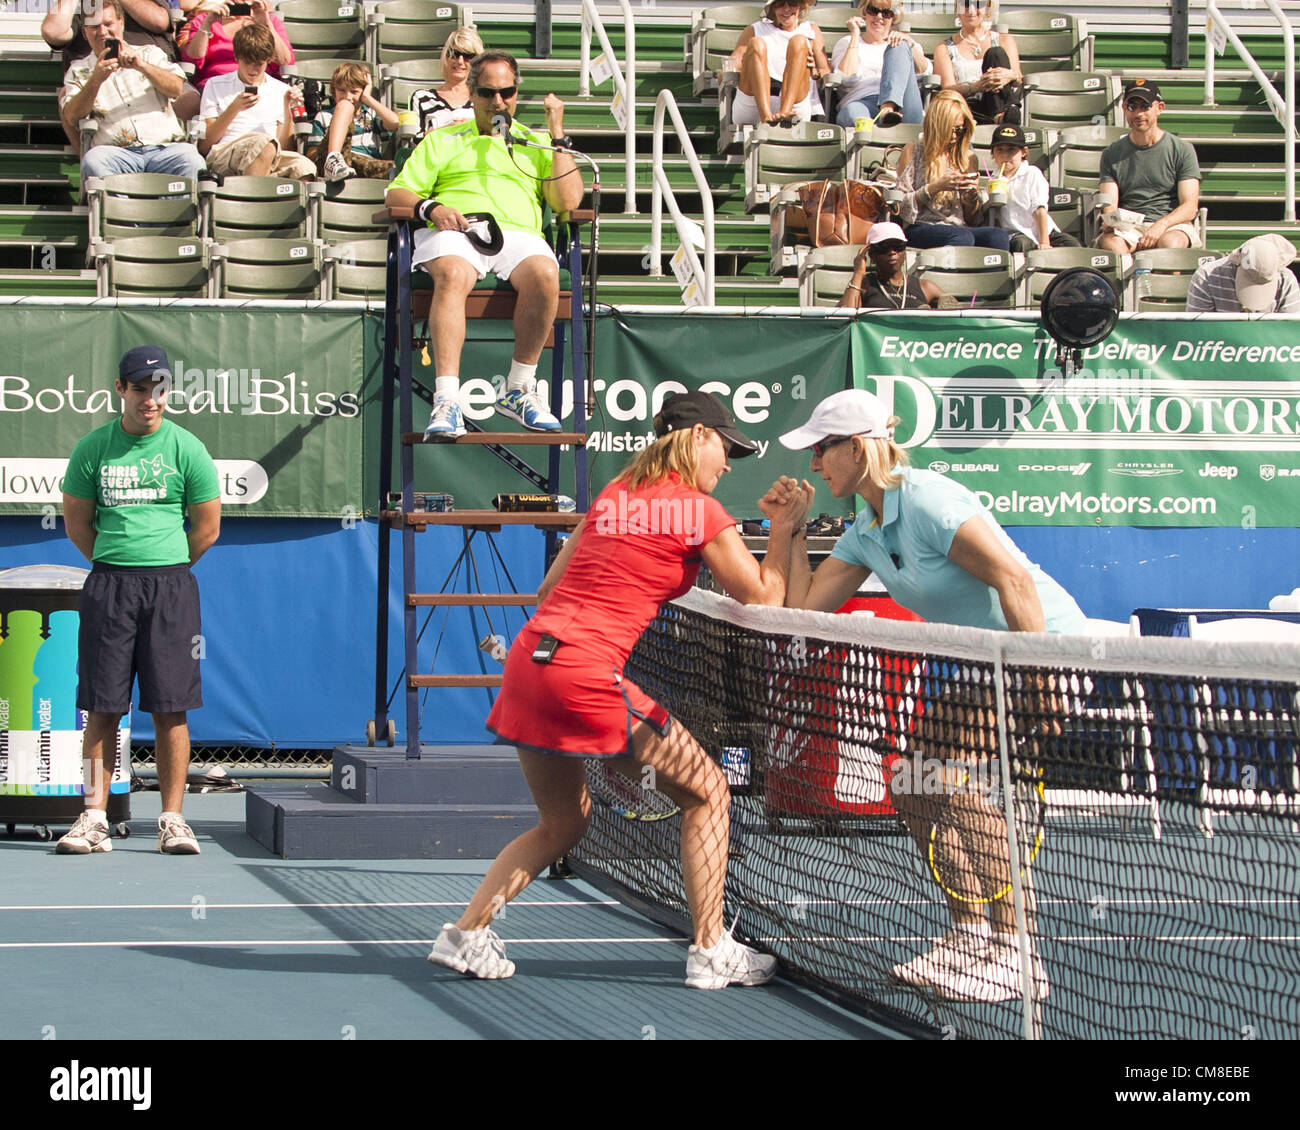 Oct. 27, 2012 - Delray Beach, FL, US - Tennis legend CHRIS EVERT and tennis great MARTINA NAVRATILOVA arm wrestle over the net during their match at the 2012 Chris Evert Pro-Celebrity Classic at the Delray Beach Tennis Center, Delray Beach, Florida. Comedian JON LOVITZ, in the umpires chair, and a ballboy watch. (Credit Image: © Arnold Drapkin/ZUMAPRESS.com) Stock Photo